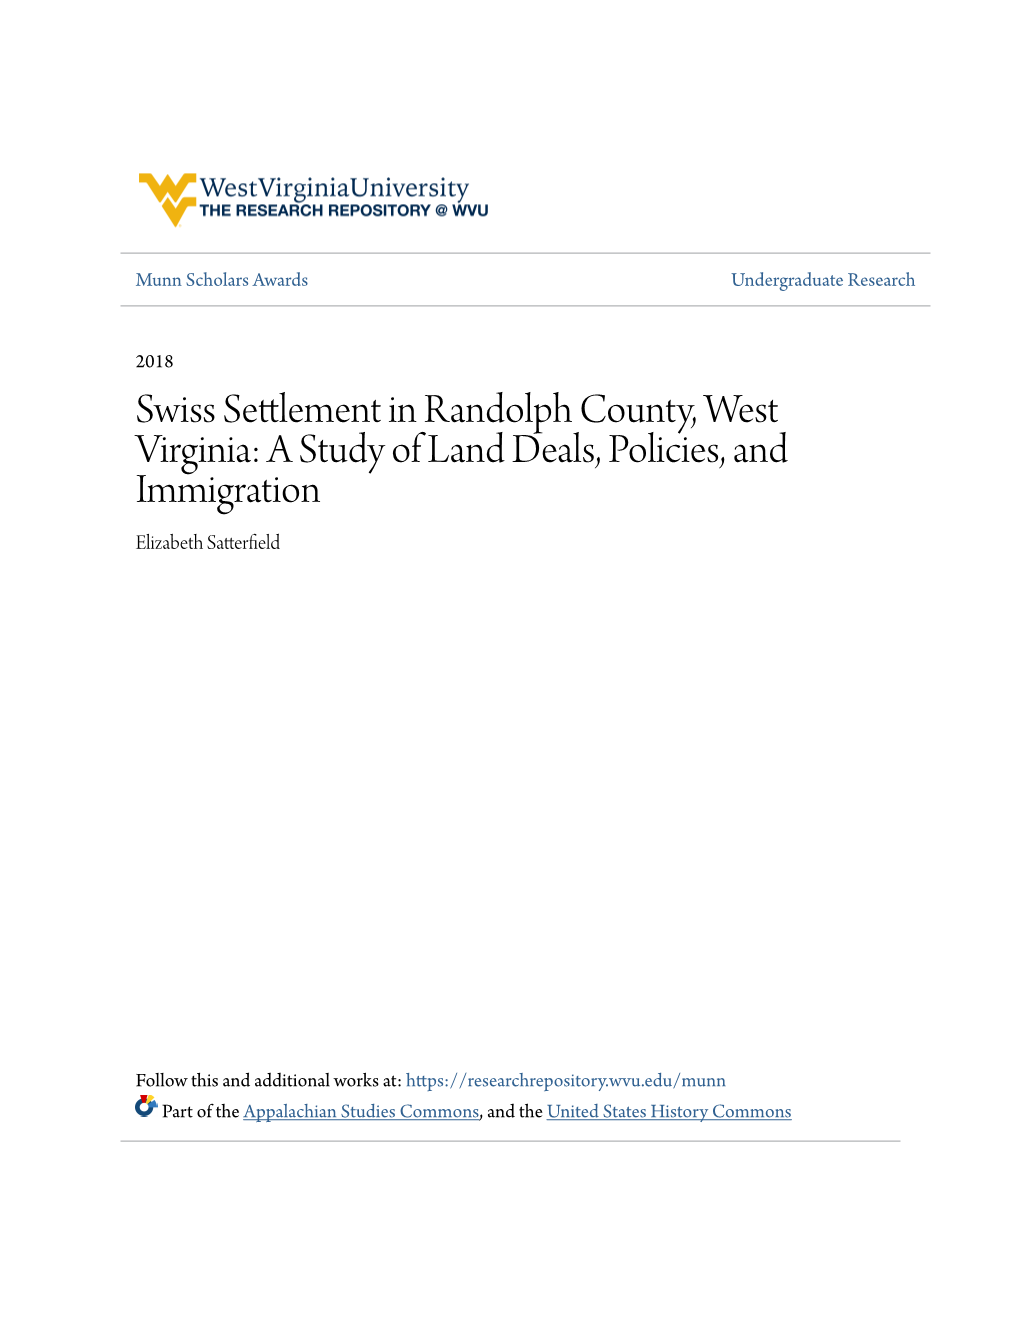 Swiss Settlement in Randolph County, West Virginia: a Study of Land Deals, Policies, and Immigration Elizabeth Satterfield